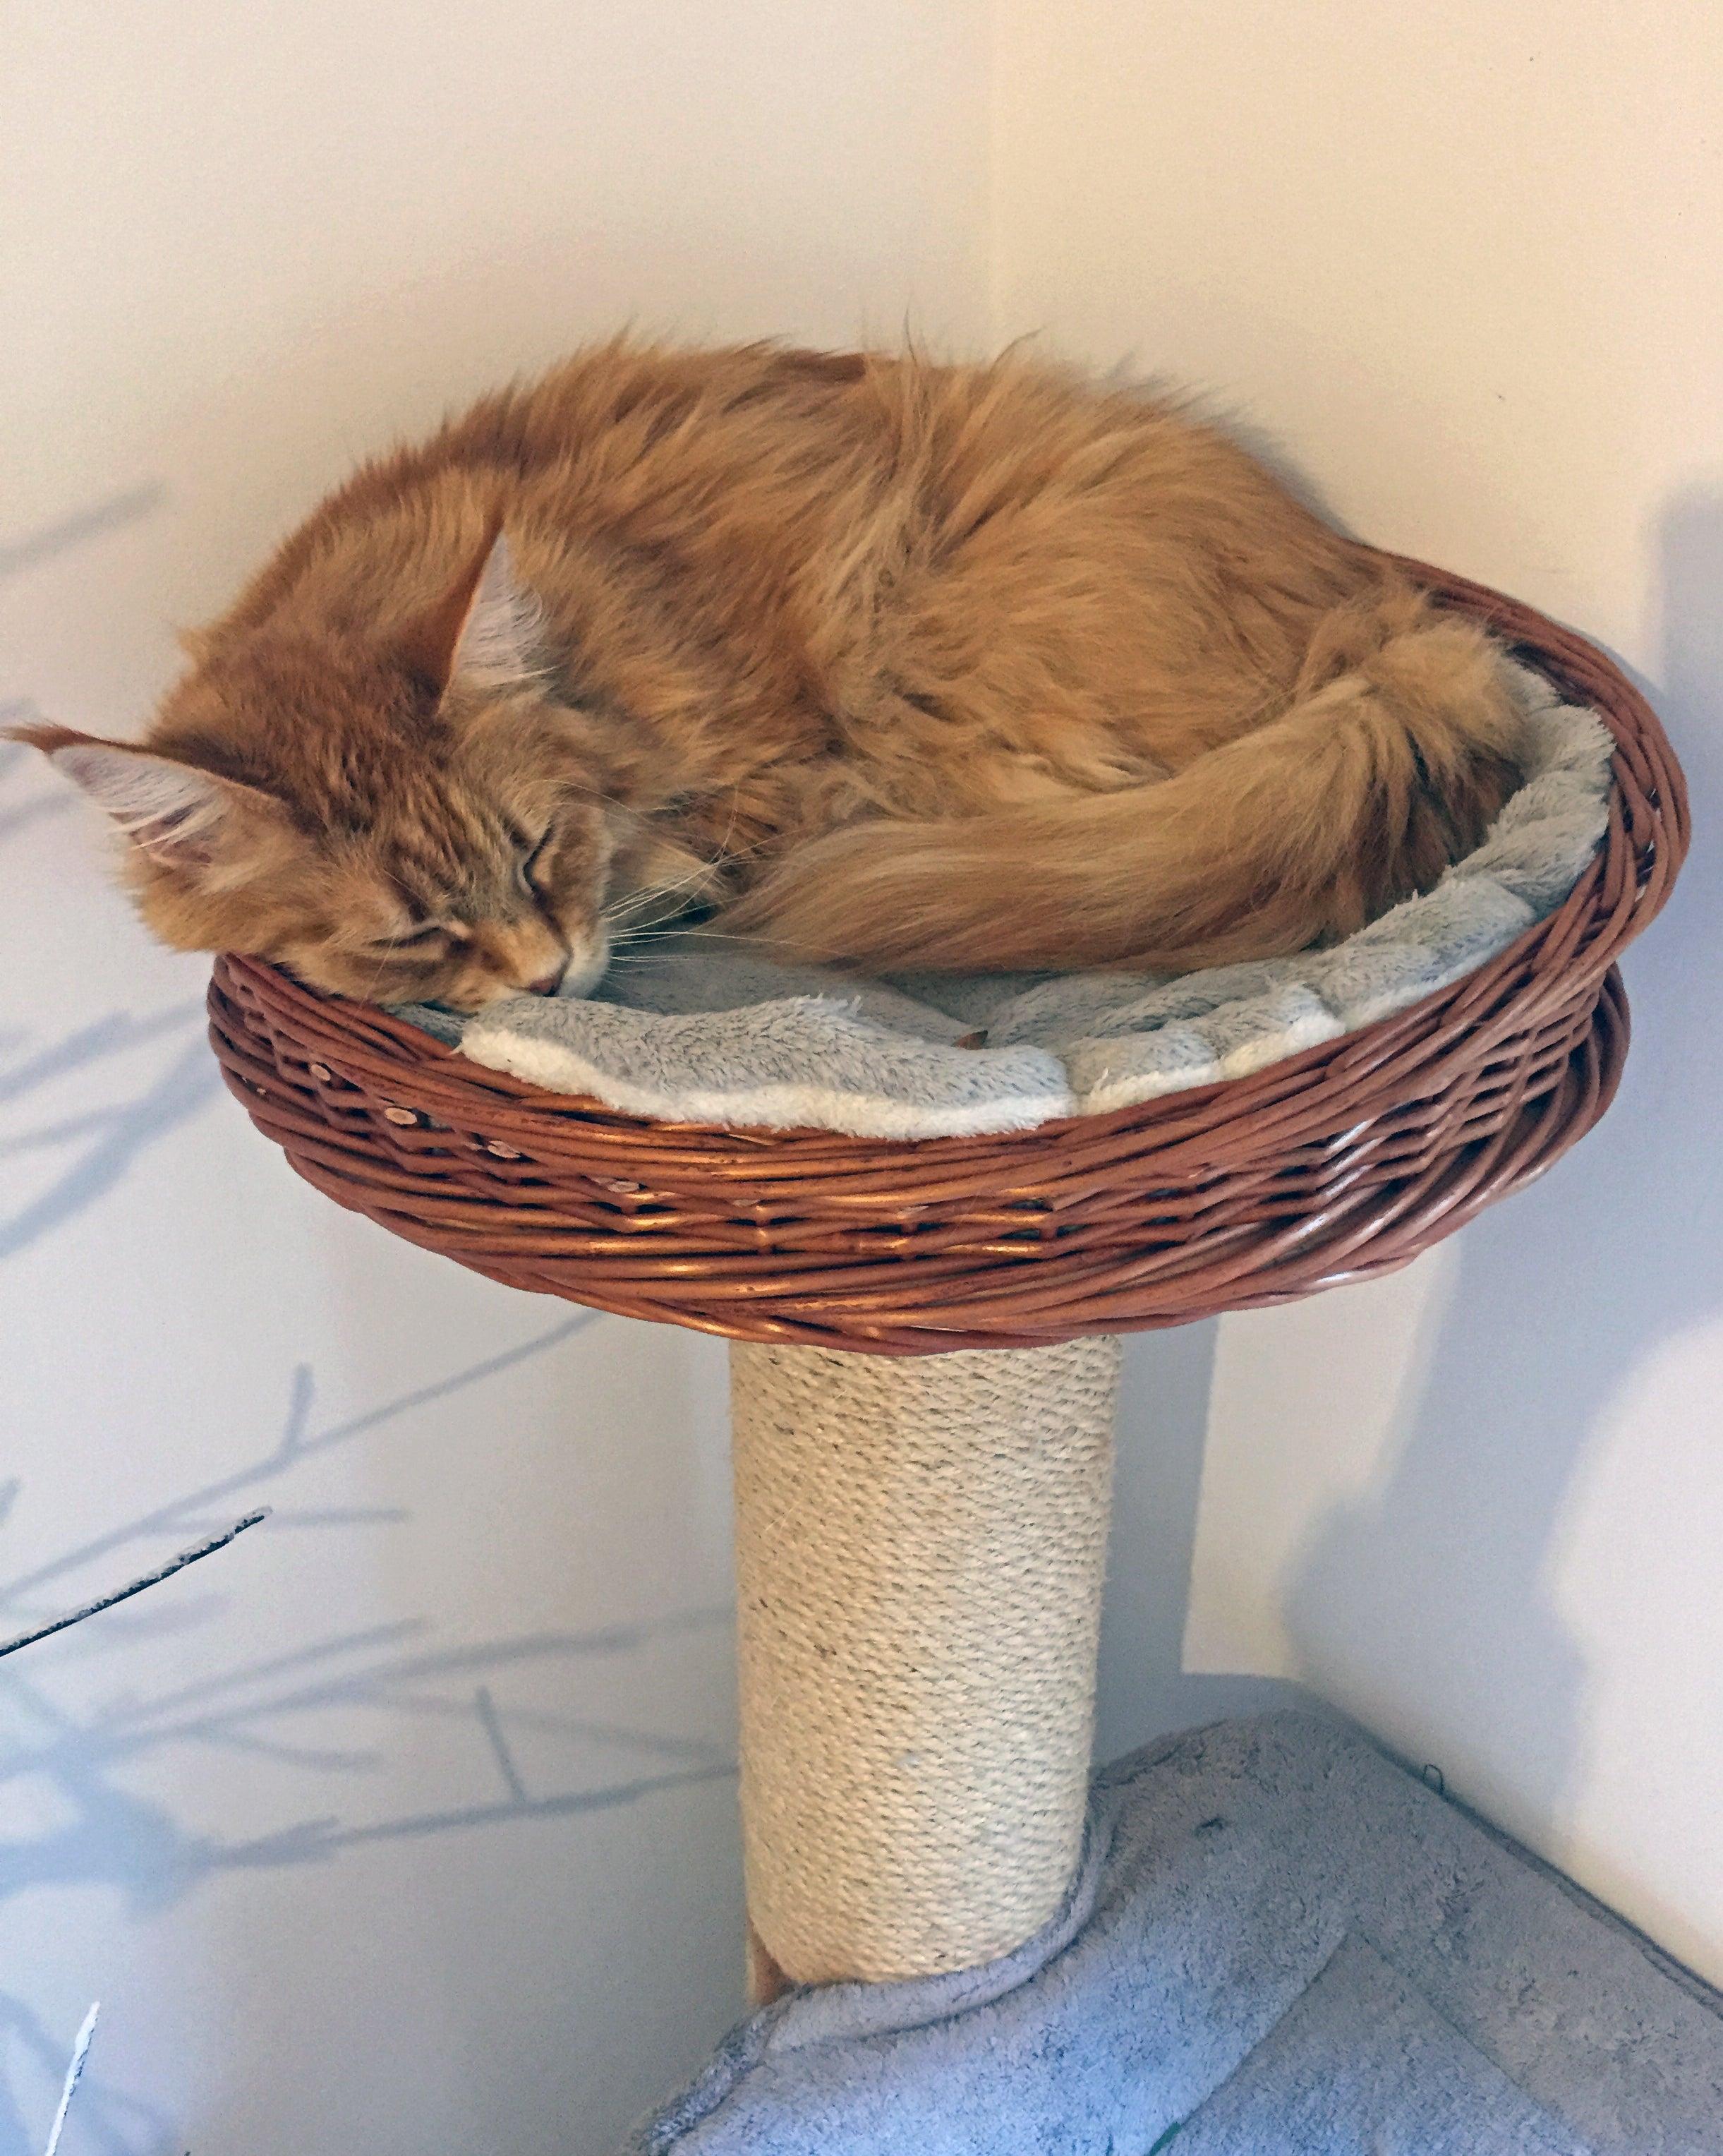 Cat curled up in a Round Wicker Basket